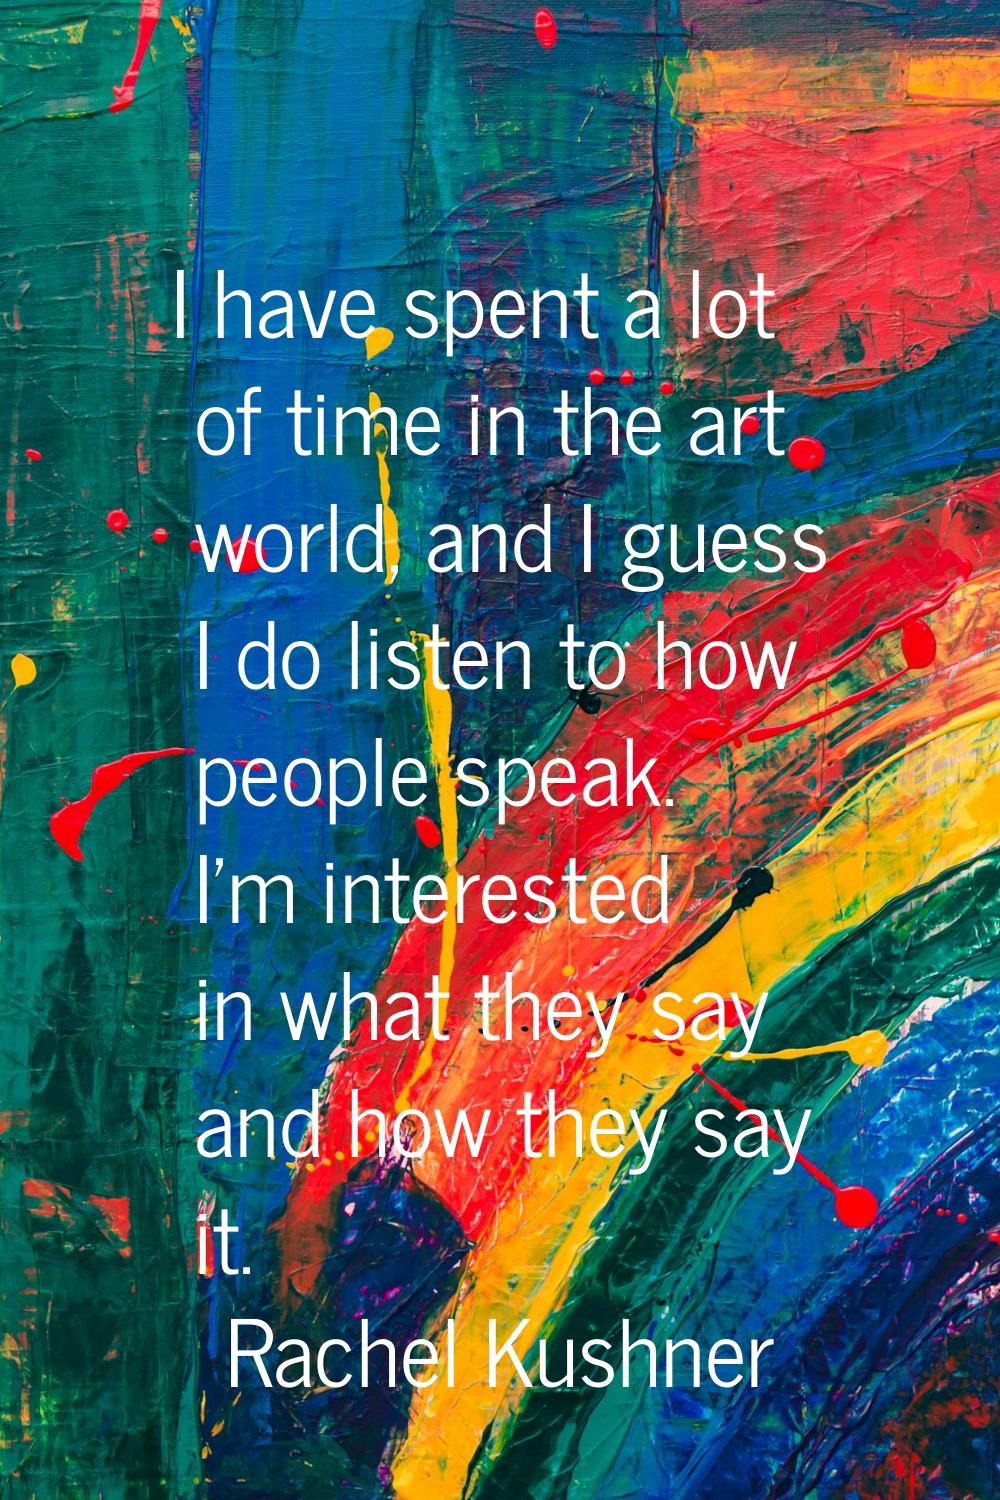 I have spent a lot of time in the art world, and I guess I do listen to how people speak. I'm inter